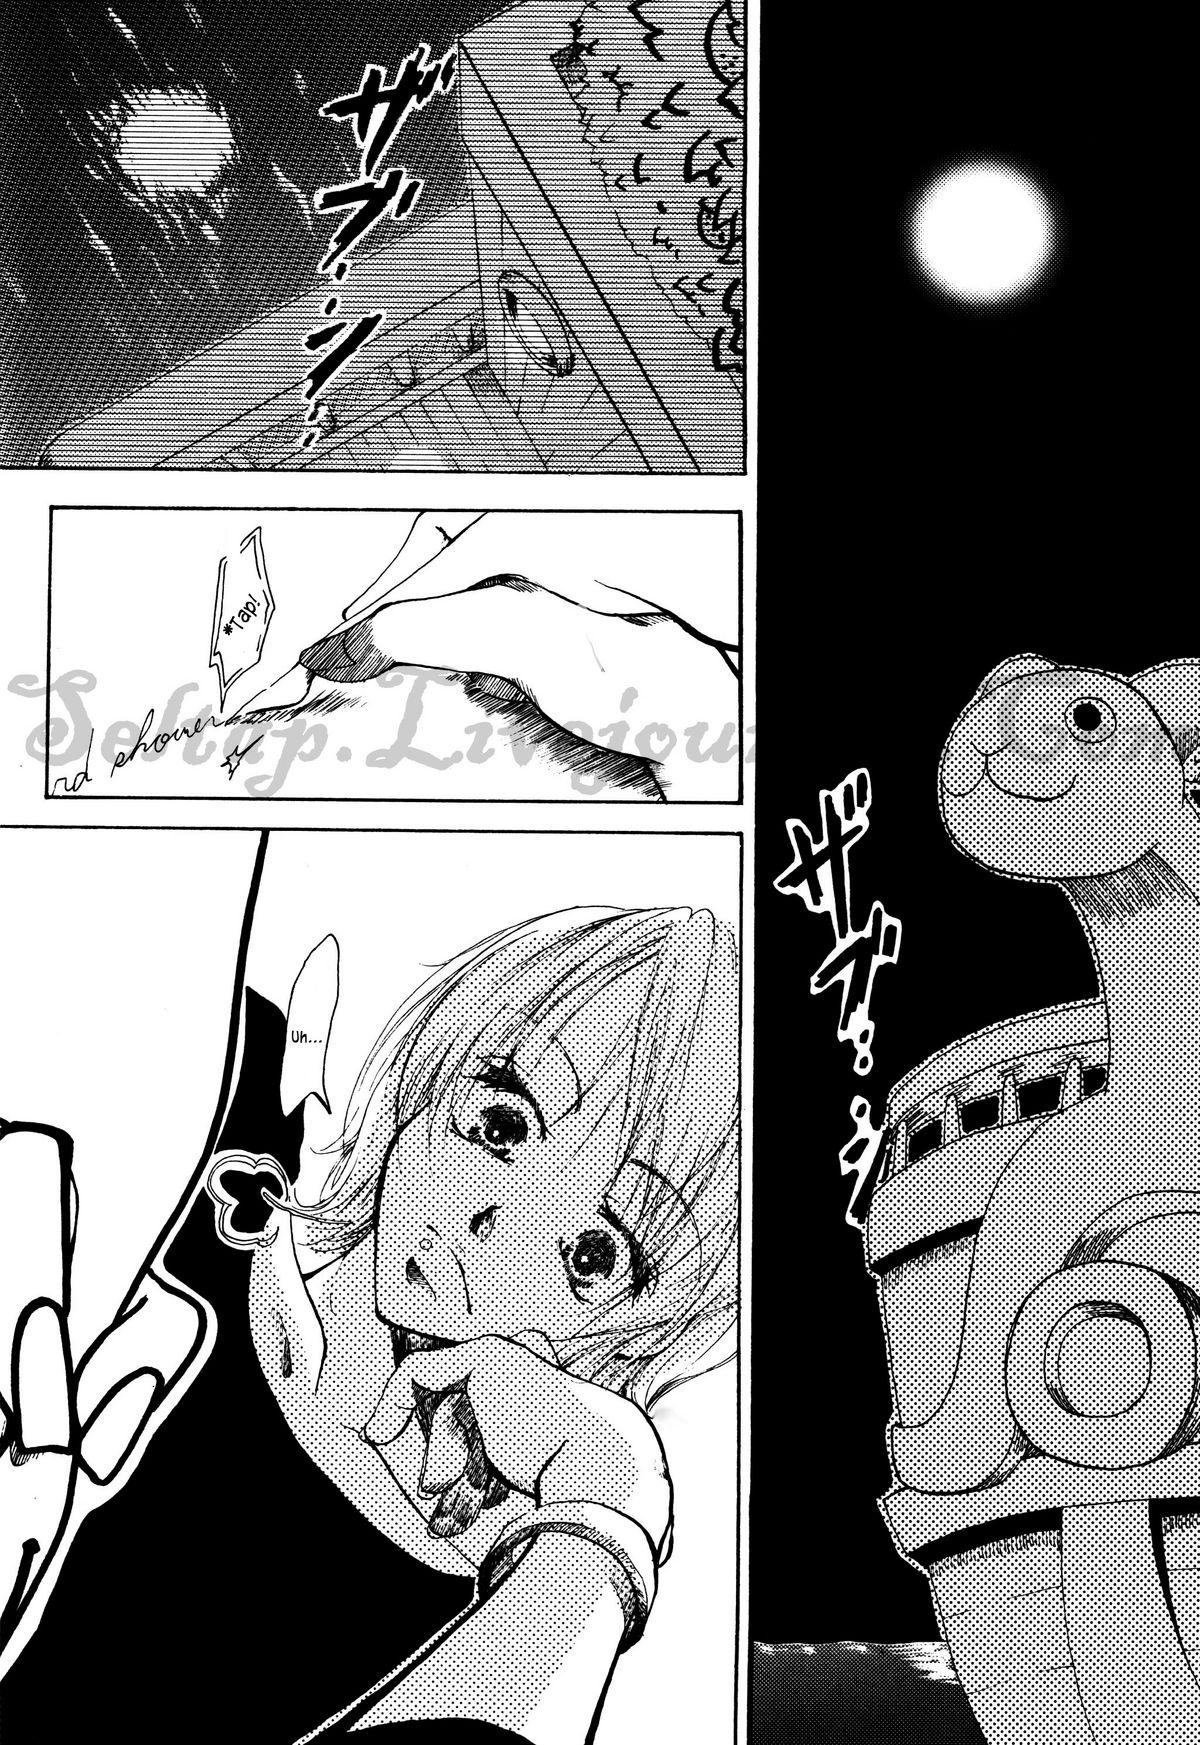 Classic Hologram - One piece Ejaculation - Page 6